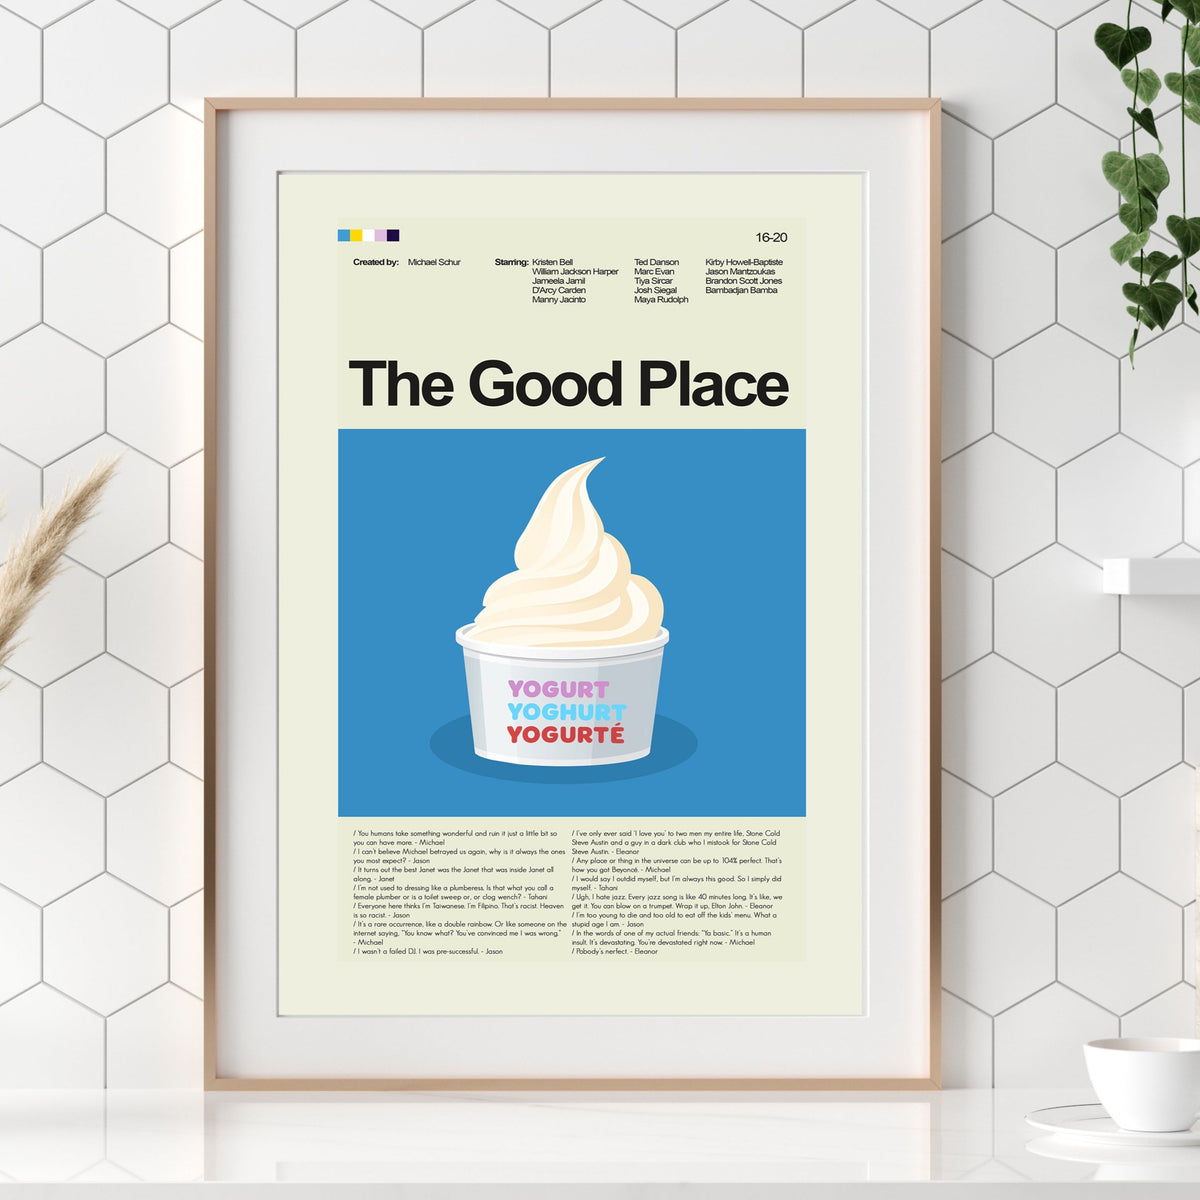 The Good Place - Frozen Yogurt | 12"x18" or 18"x24" Print only